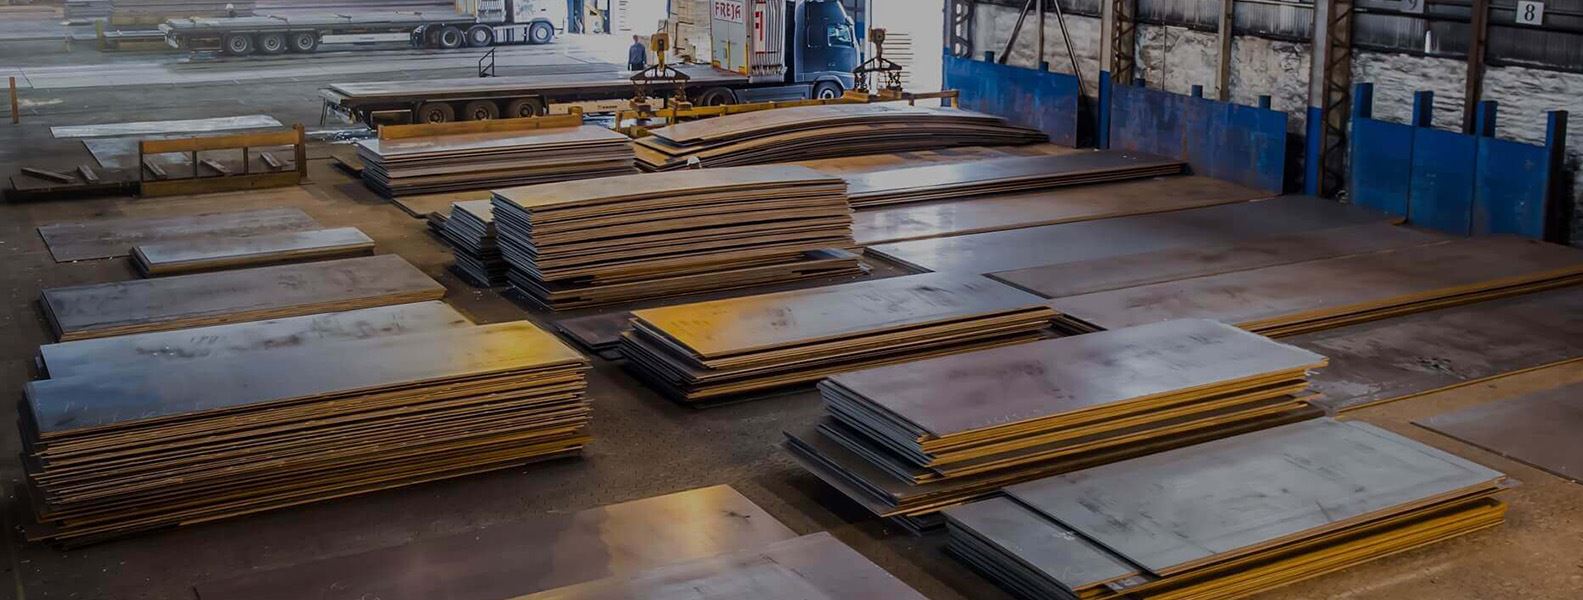 Stainless Steel Sheet & Plates